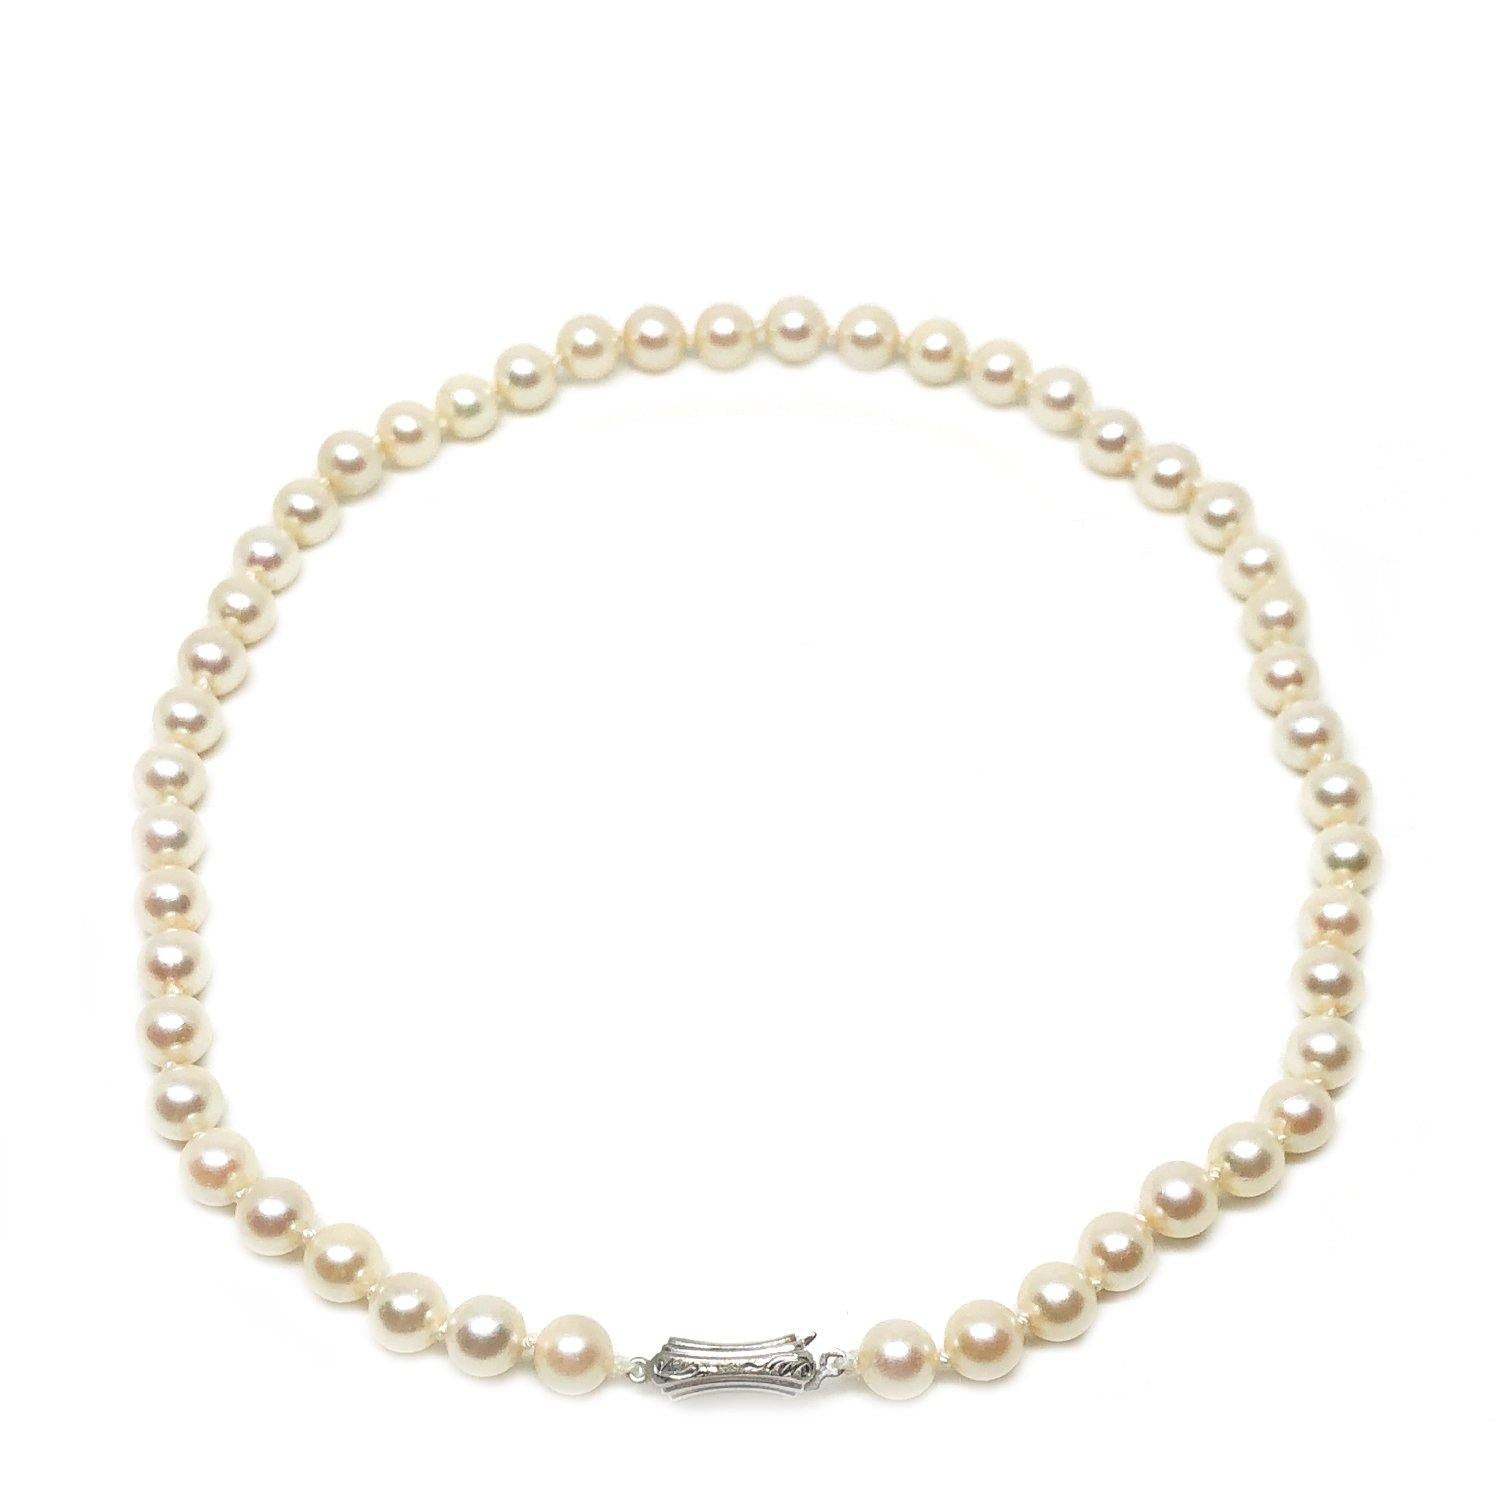 Art Deco Japanese Saltwater Cultured Akoya Pearl Necklace - 18K White Gold 16 Inch